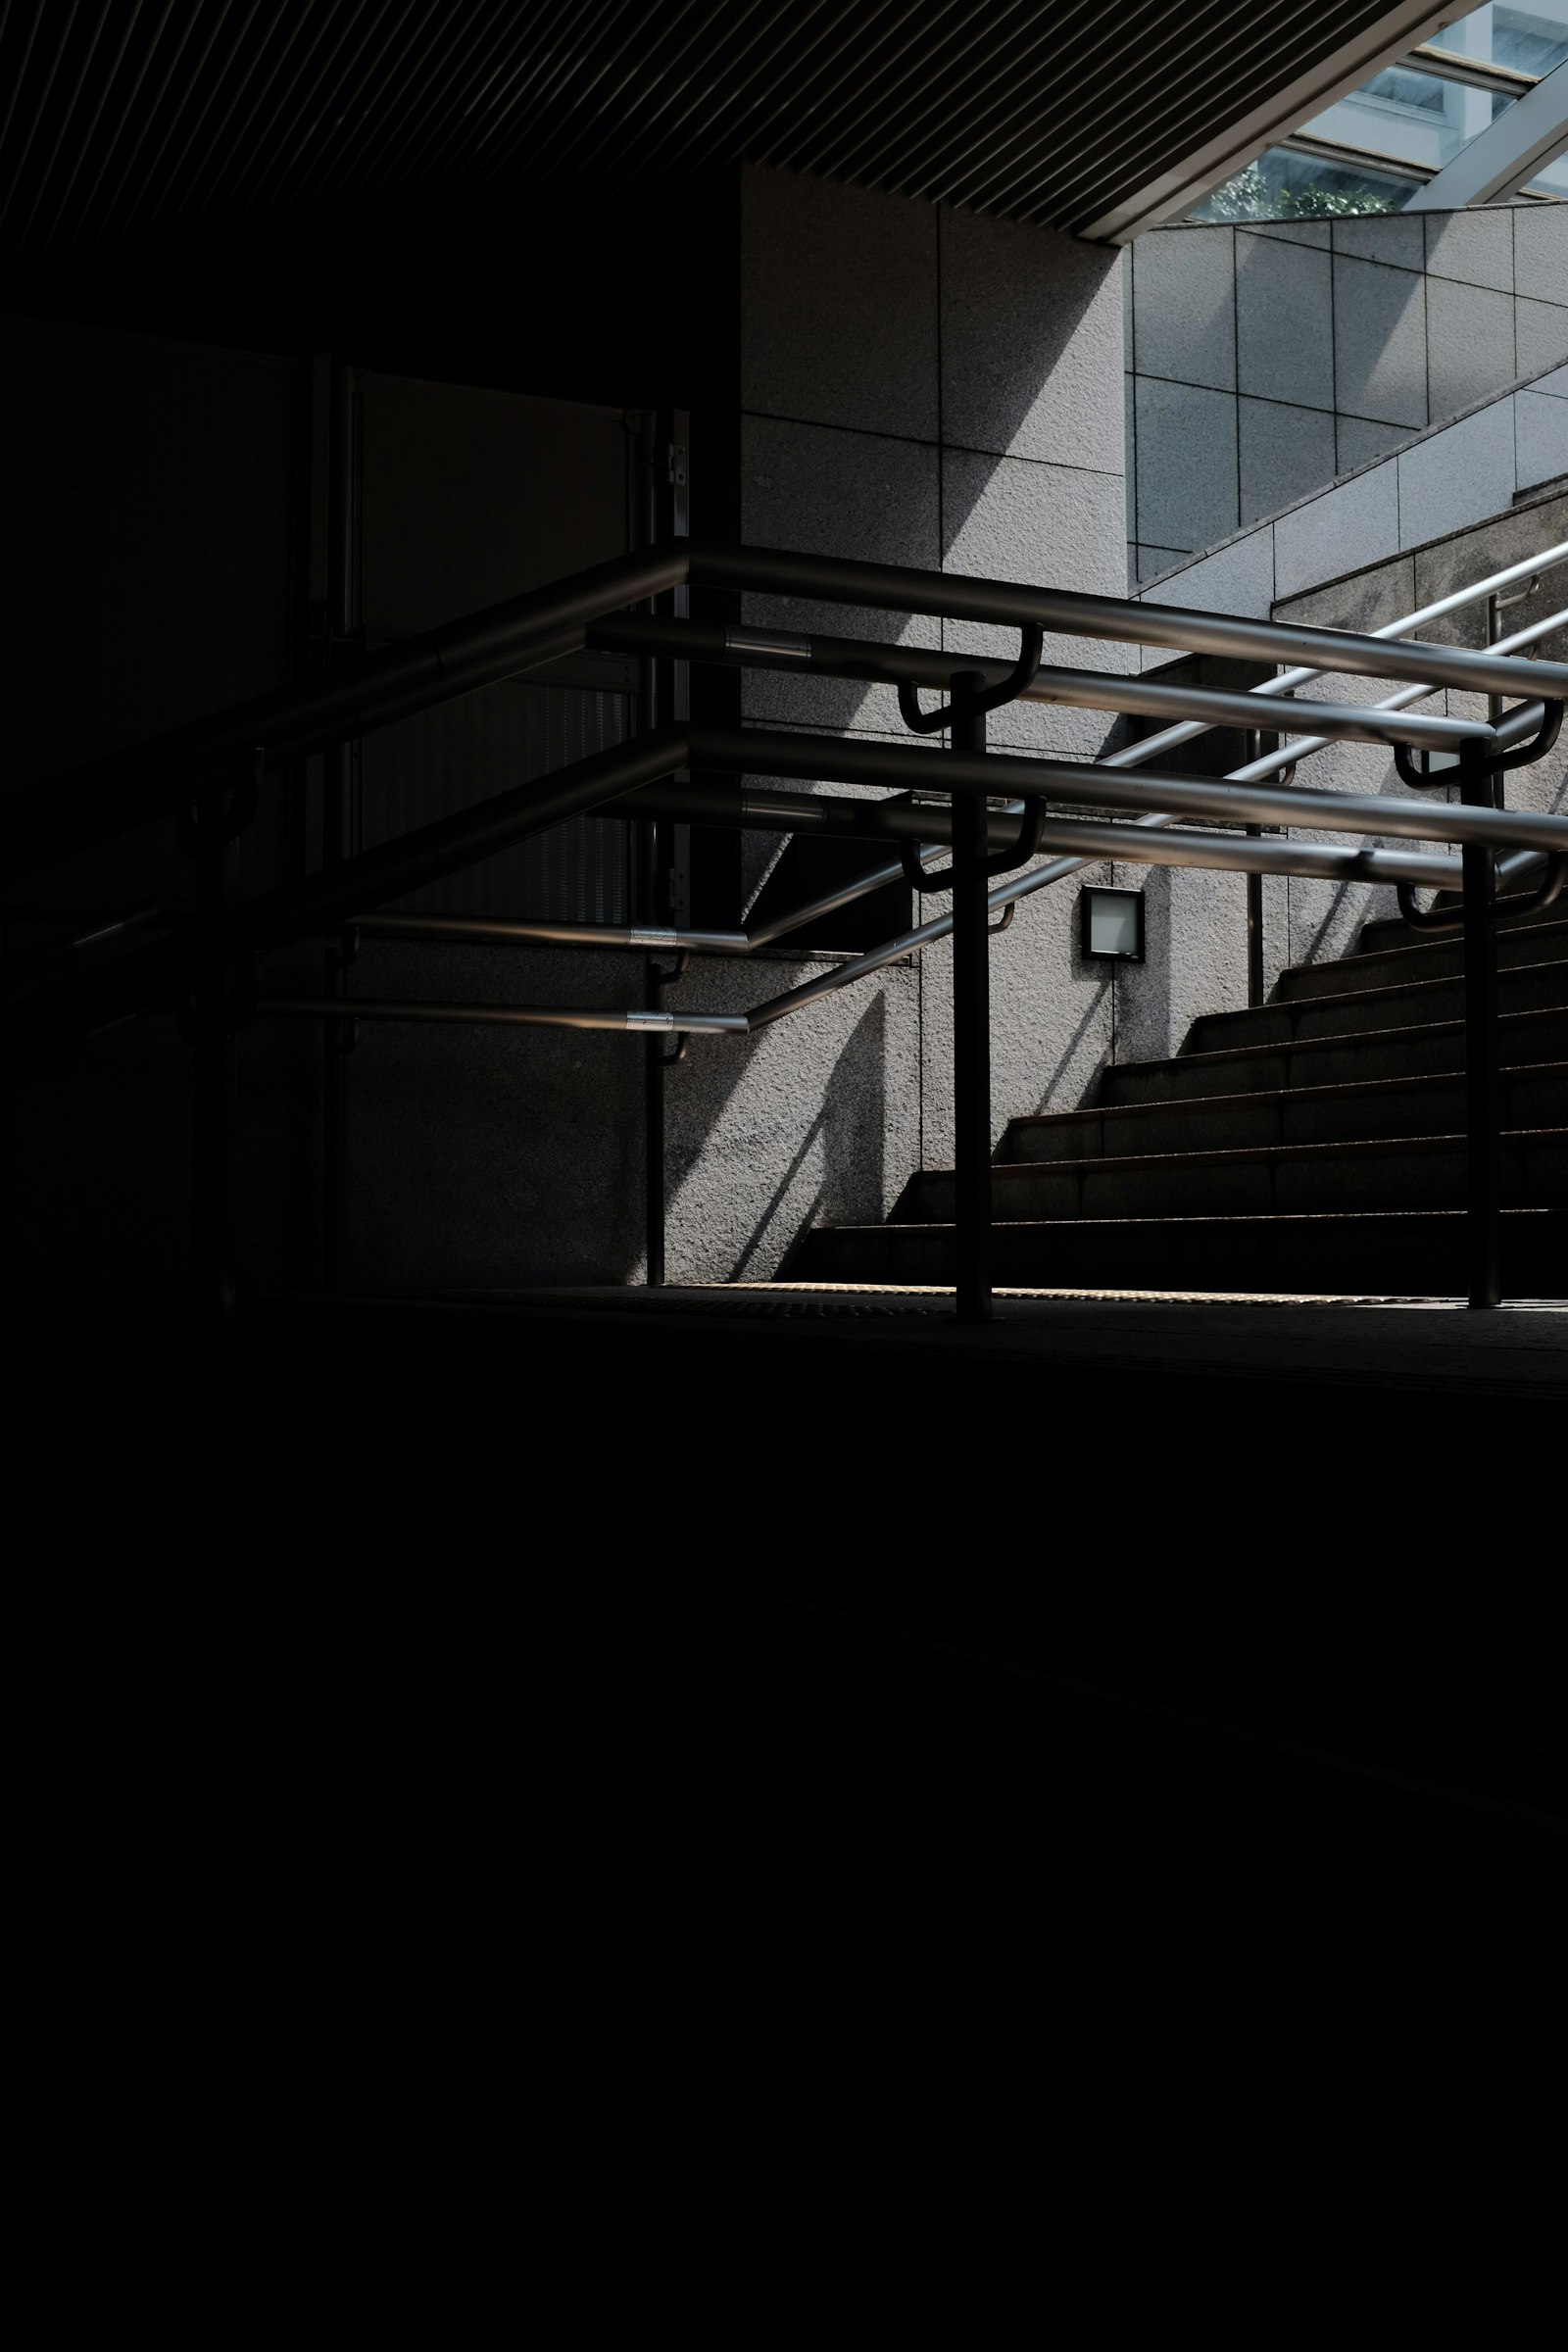 Fujifilm X100F sample photo. Black metal staircase with photography